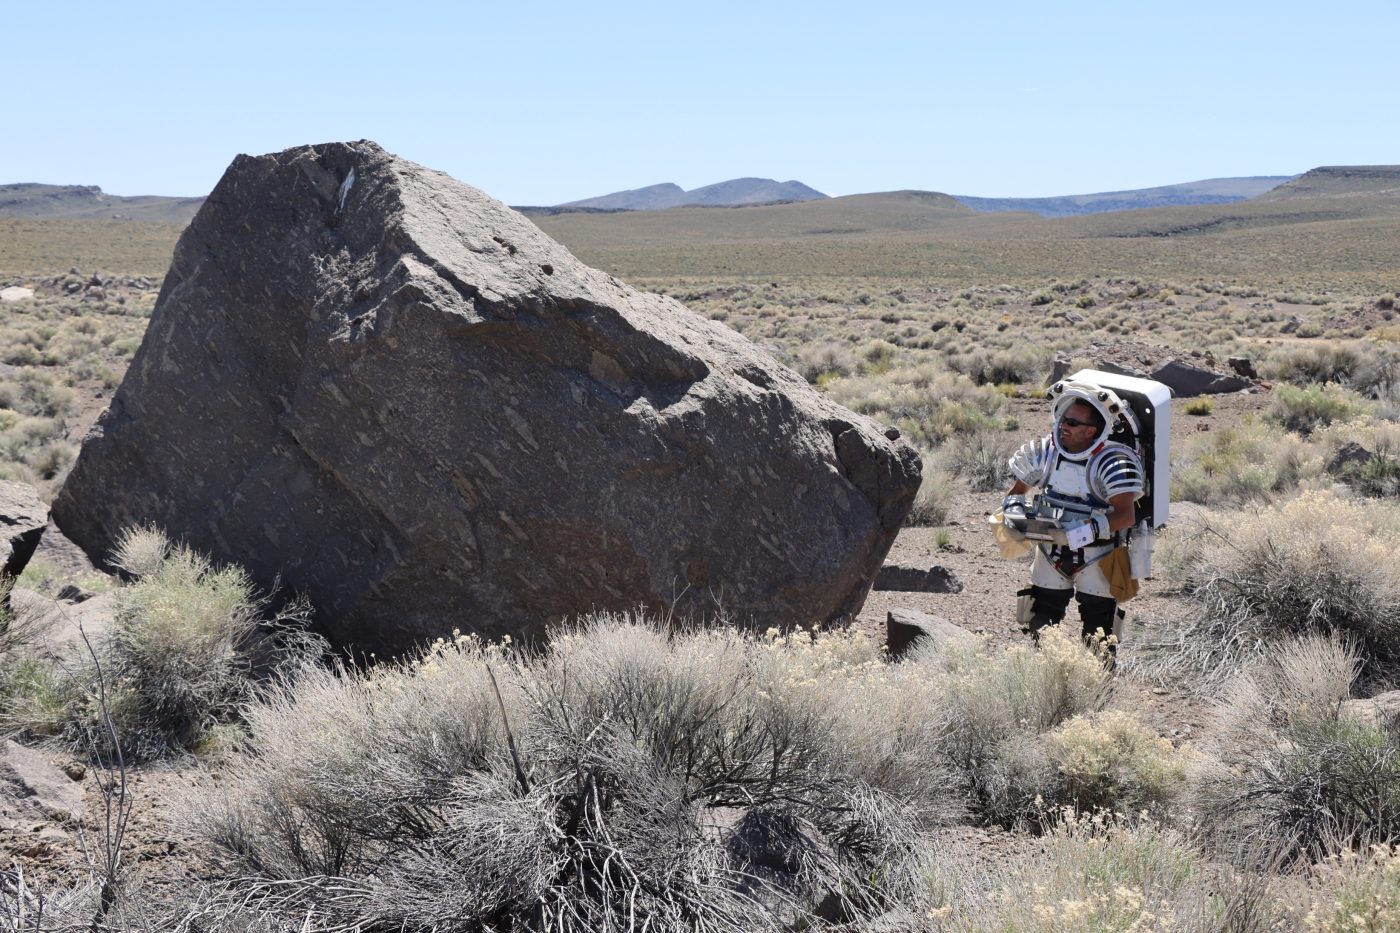 large rock in the desert on the left and NASA scientist in a suit to the right